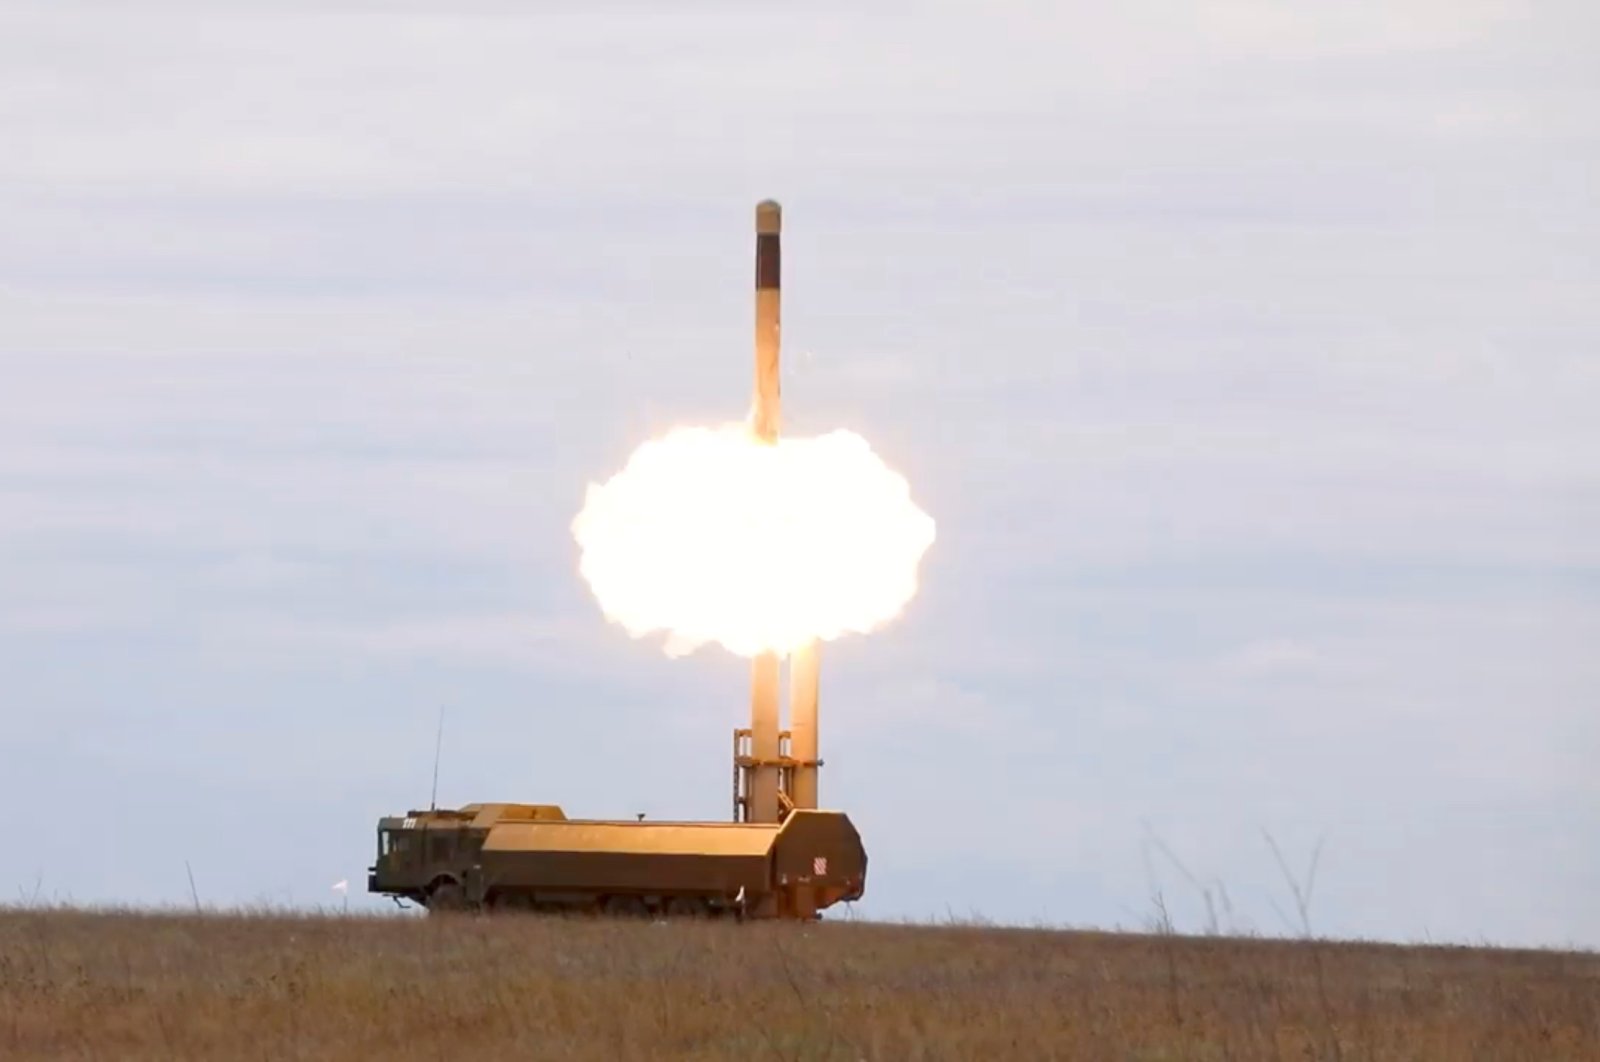 The Bastion coastal missile system of the Black Sea Fleet launches a missile against sea targets during the exercise at the Opuk training ground in Crimea, in this still image taken from video released Sept. 23, 2021. (Russian Defense Ministry Press Service via Reuters)